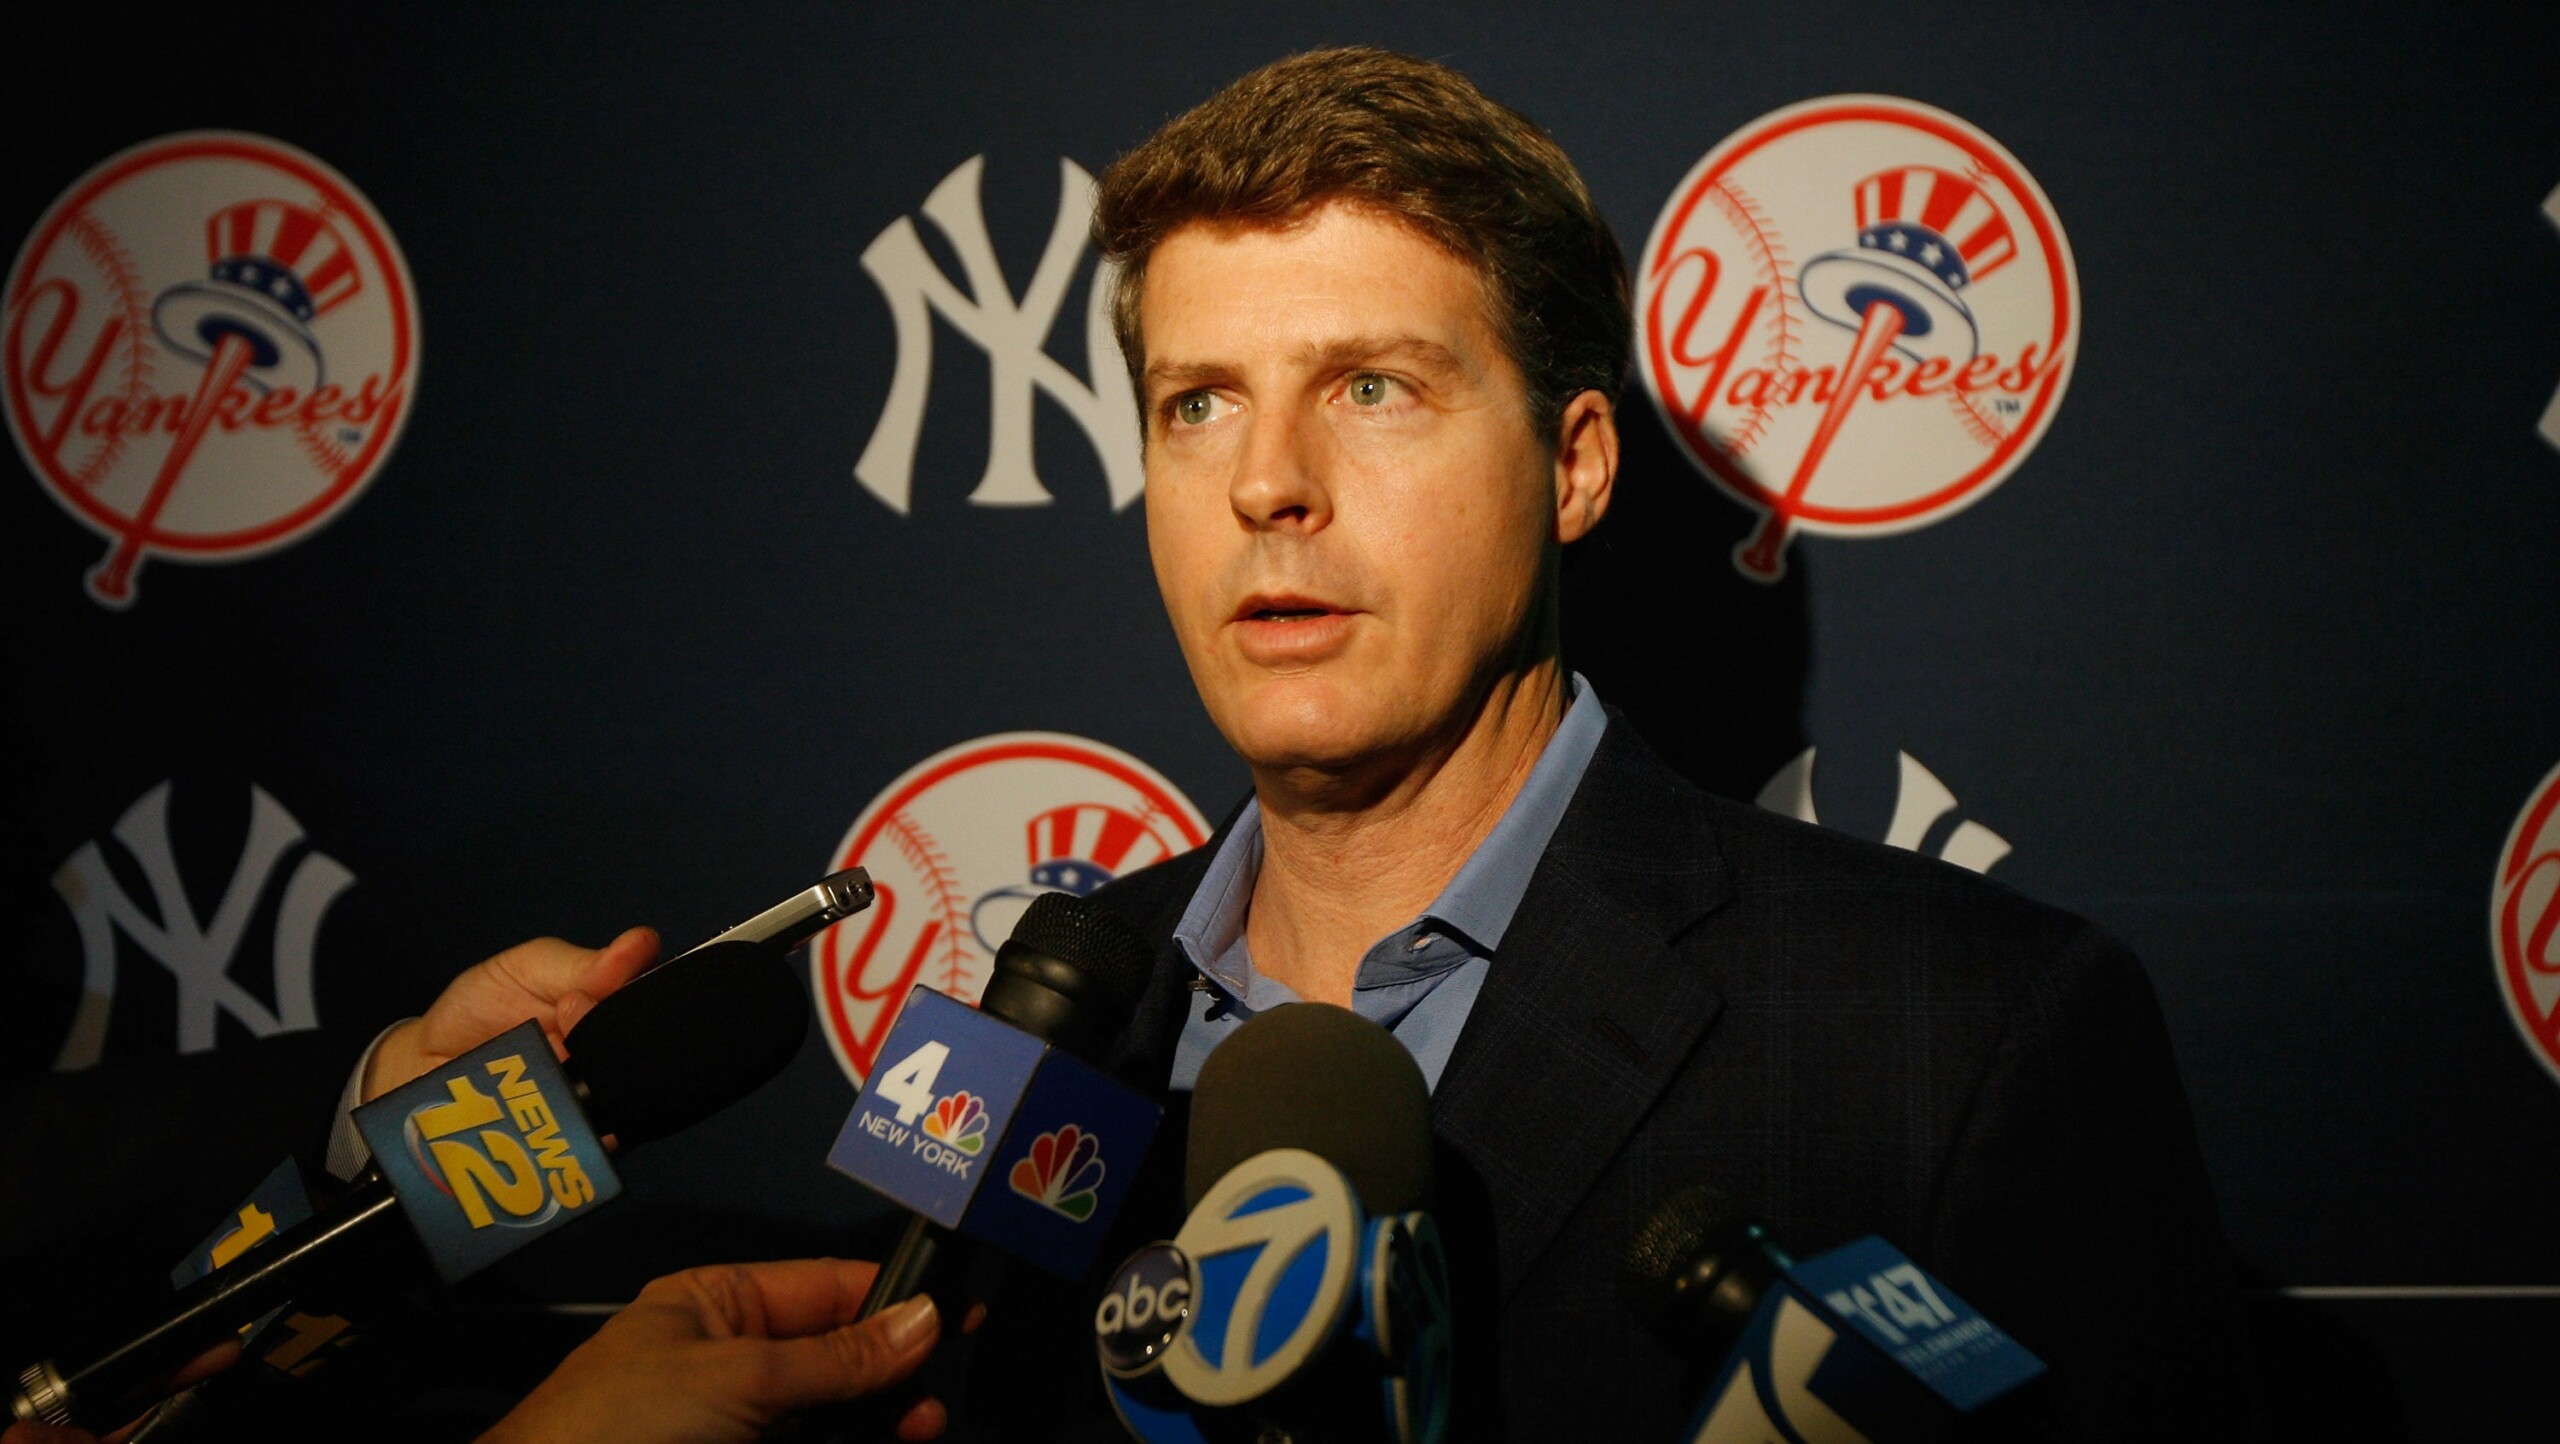 MLB agent gives Yankees owner everything He runs em like scaled